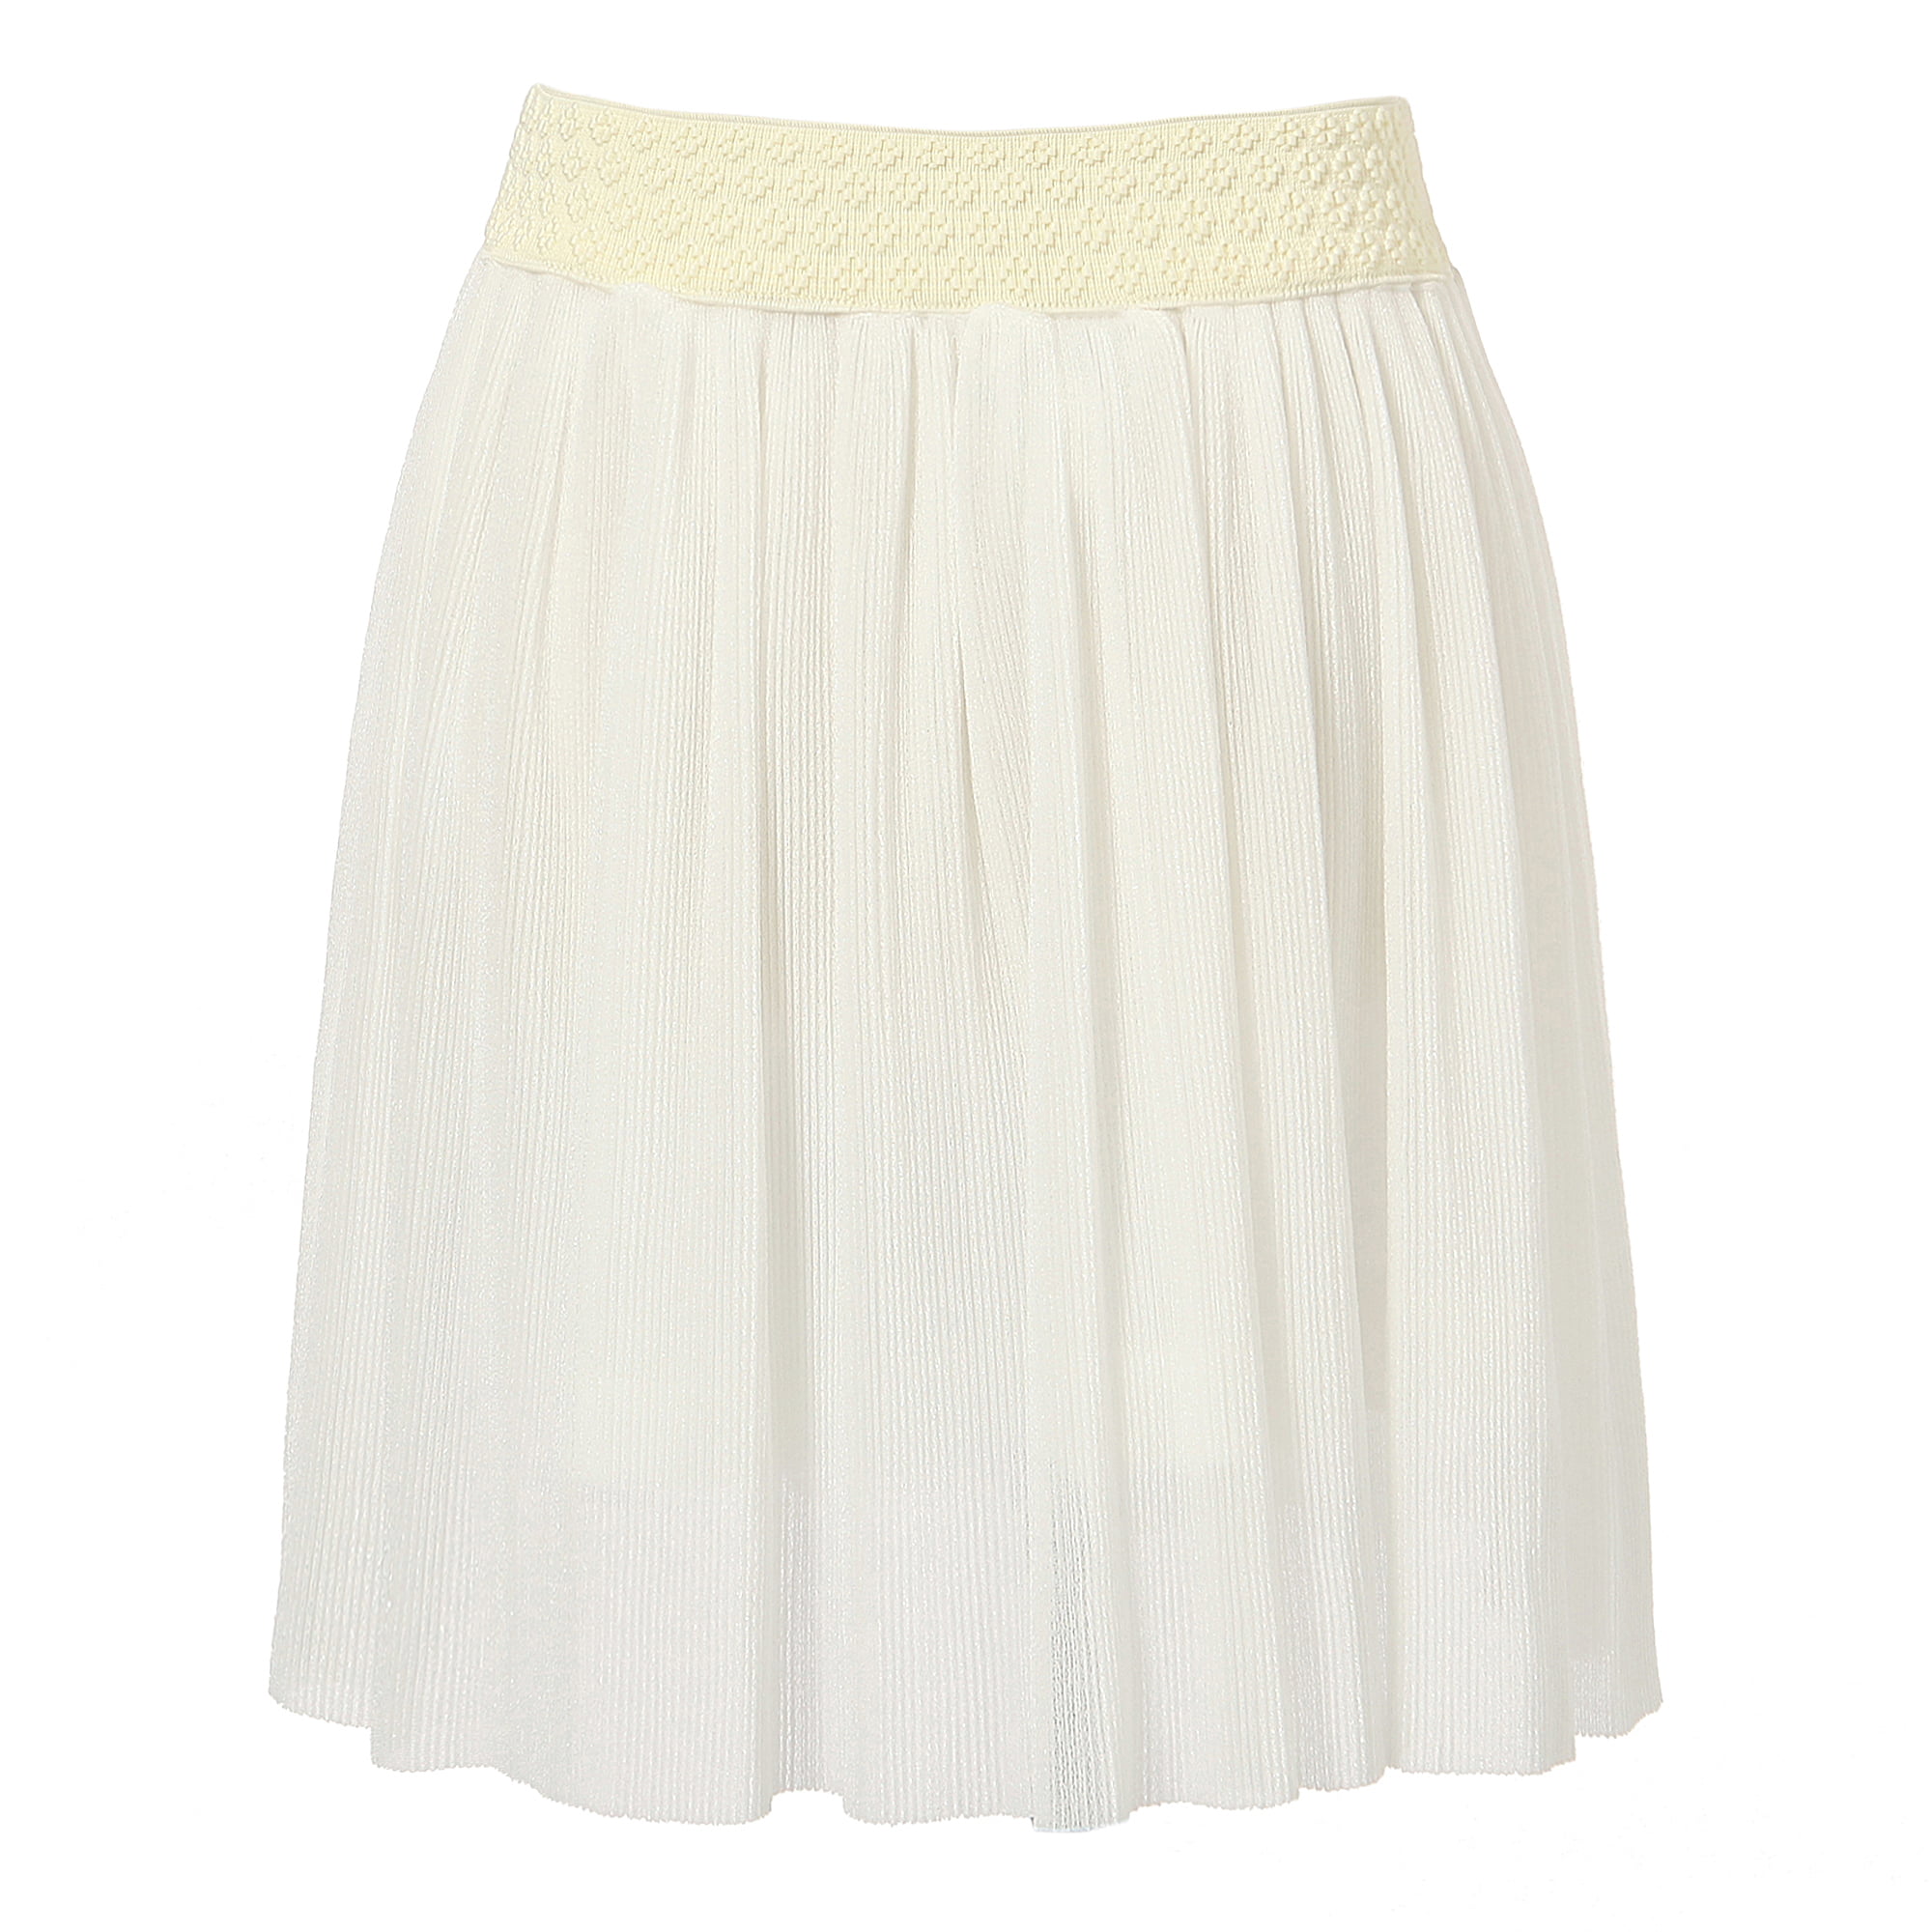 Richie House Girls' woven lace skirt with elastic waist band RH0990 ...